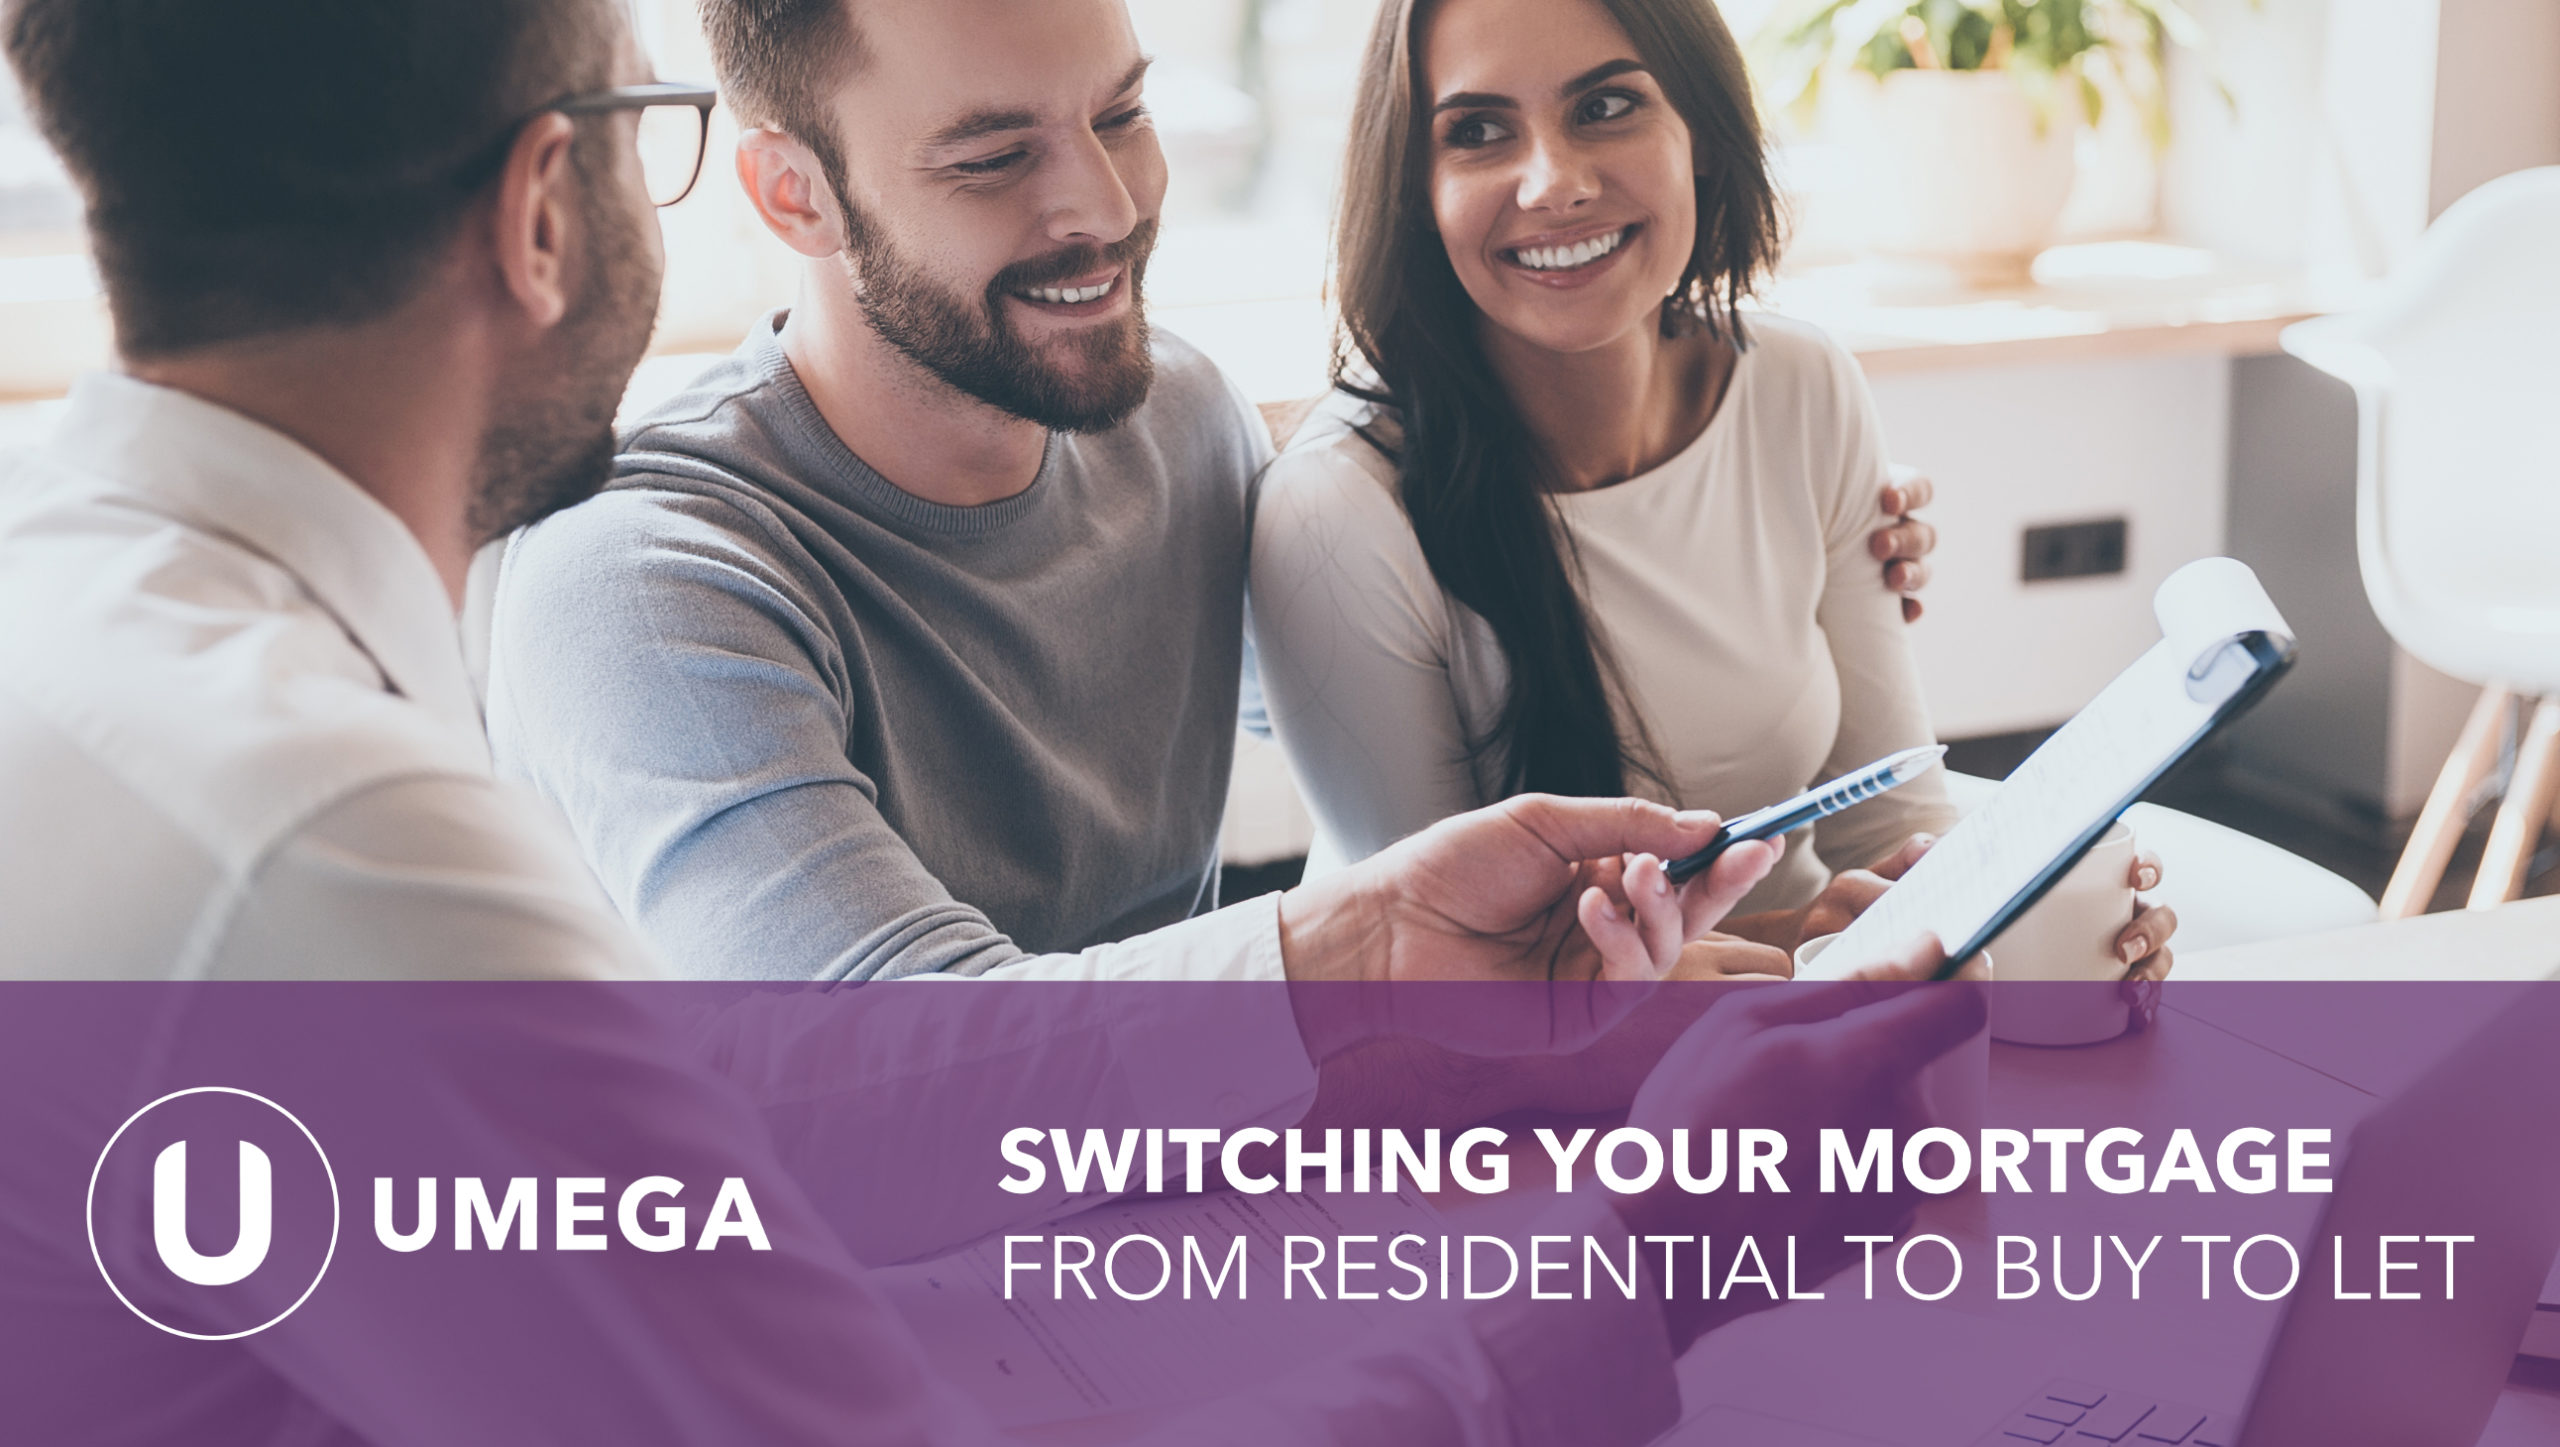 Switching your mortgage from residential to buy to let